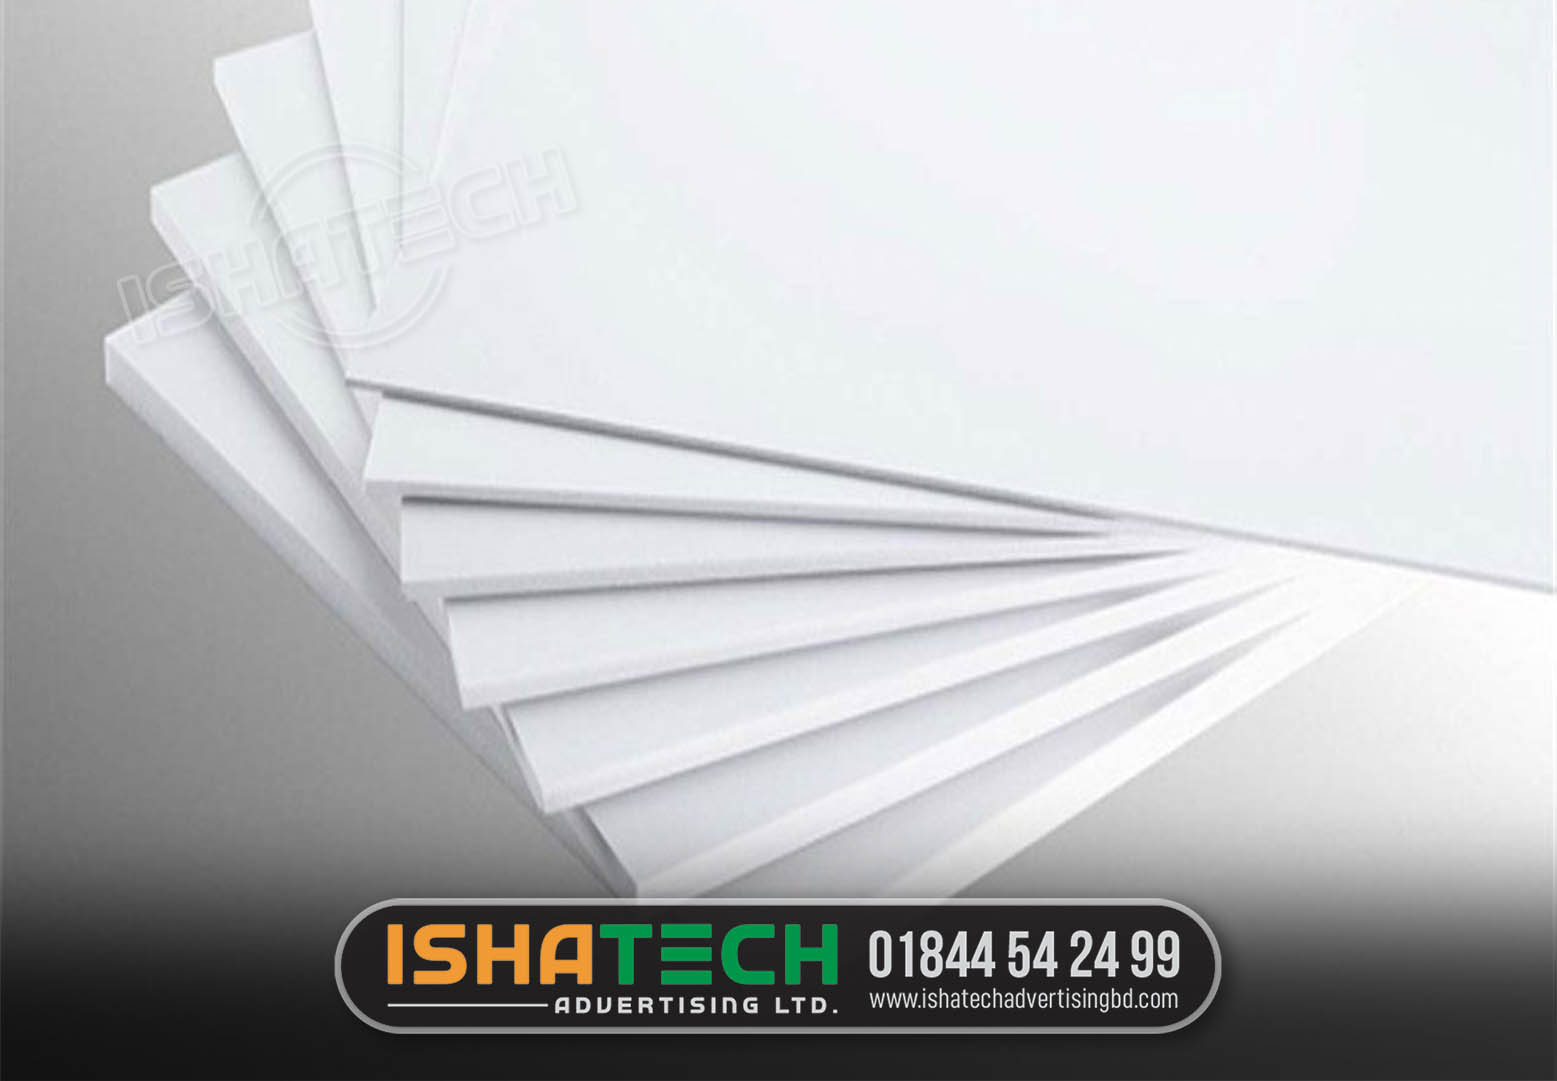 PVC Sheet Price in Bangladesh. 4×8 pvc sheet price in Bangladesh. 4mm pvc sheet price in Bangladesh. 12mm pvc sheet price in Bangladesh. Rfl pvc sheet price in Bangladesh. 2mm pvc sheet price in Bangladesh. upvc sheet price in Bangladesh. 18mm pvc board price in Bangladesh. Find the PVC Sheet Price in Bangladesh. RFL is the Largest Manufacturer of UPVC sheets in BD. Visit us to find the glossy, laser cutting, colored, soft, white & PVC sheet at cheap prices. 3mm PVC Board White for Craft and DIY Project 3 pcs. 3mm PVC Board 5pcs White/blue/yellow for Craft. 5mm PVC Board 5pcs White for Craft and DIY Project. PVC Board 8mm white colour for DIY project model.